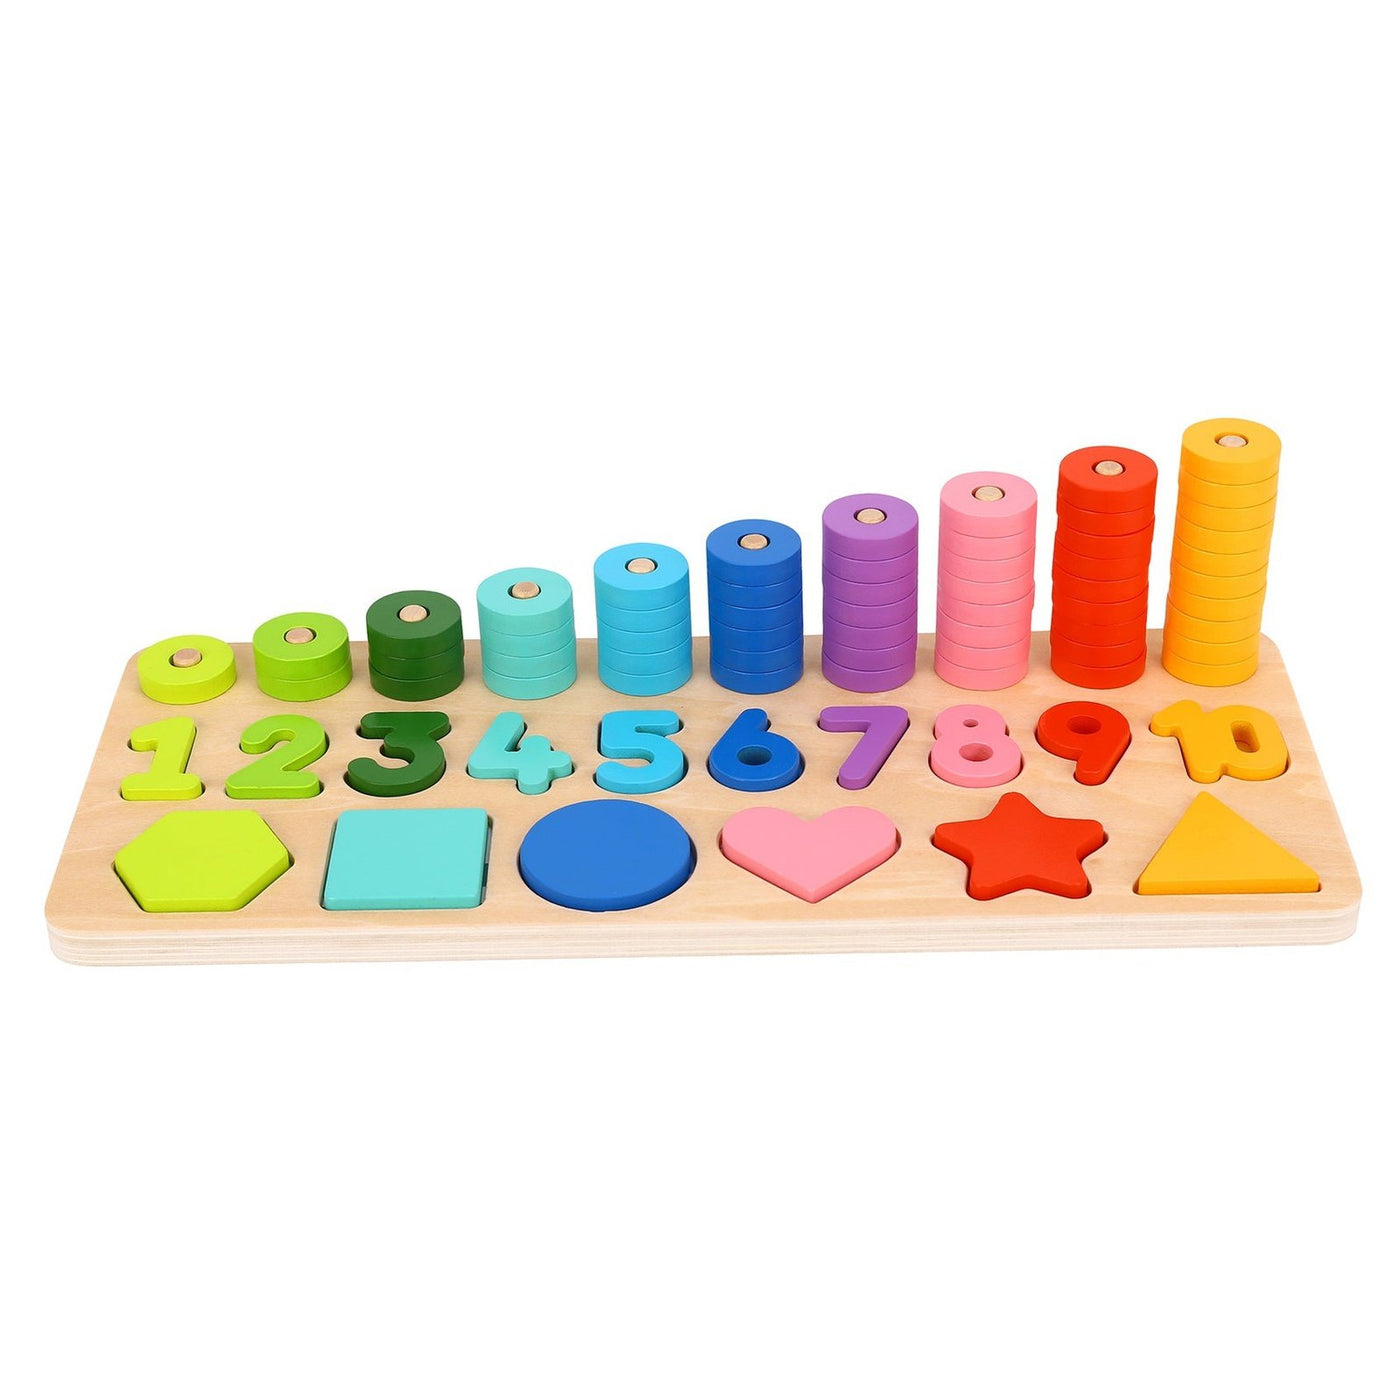 Counting Stacker With Shapes